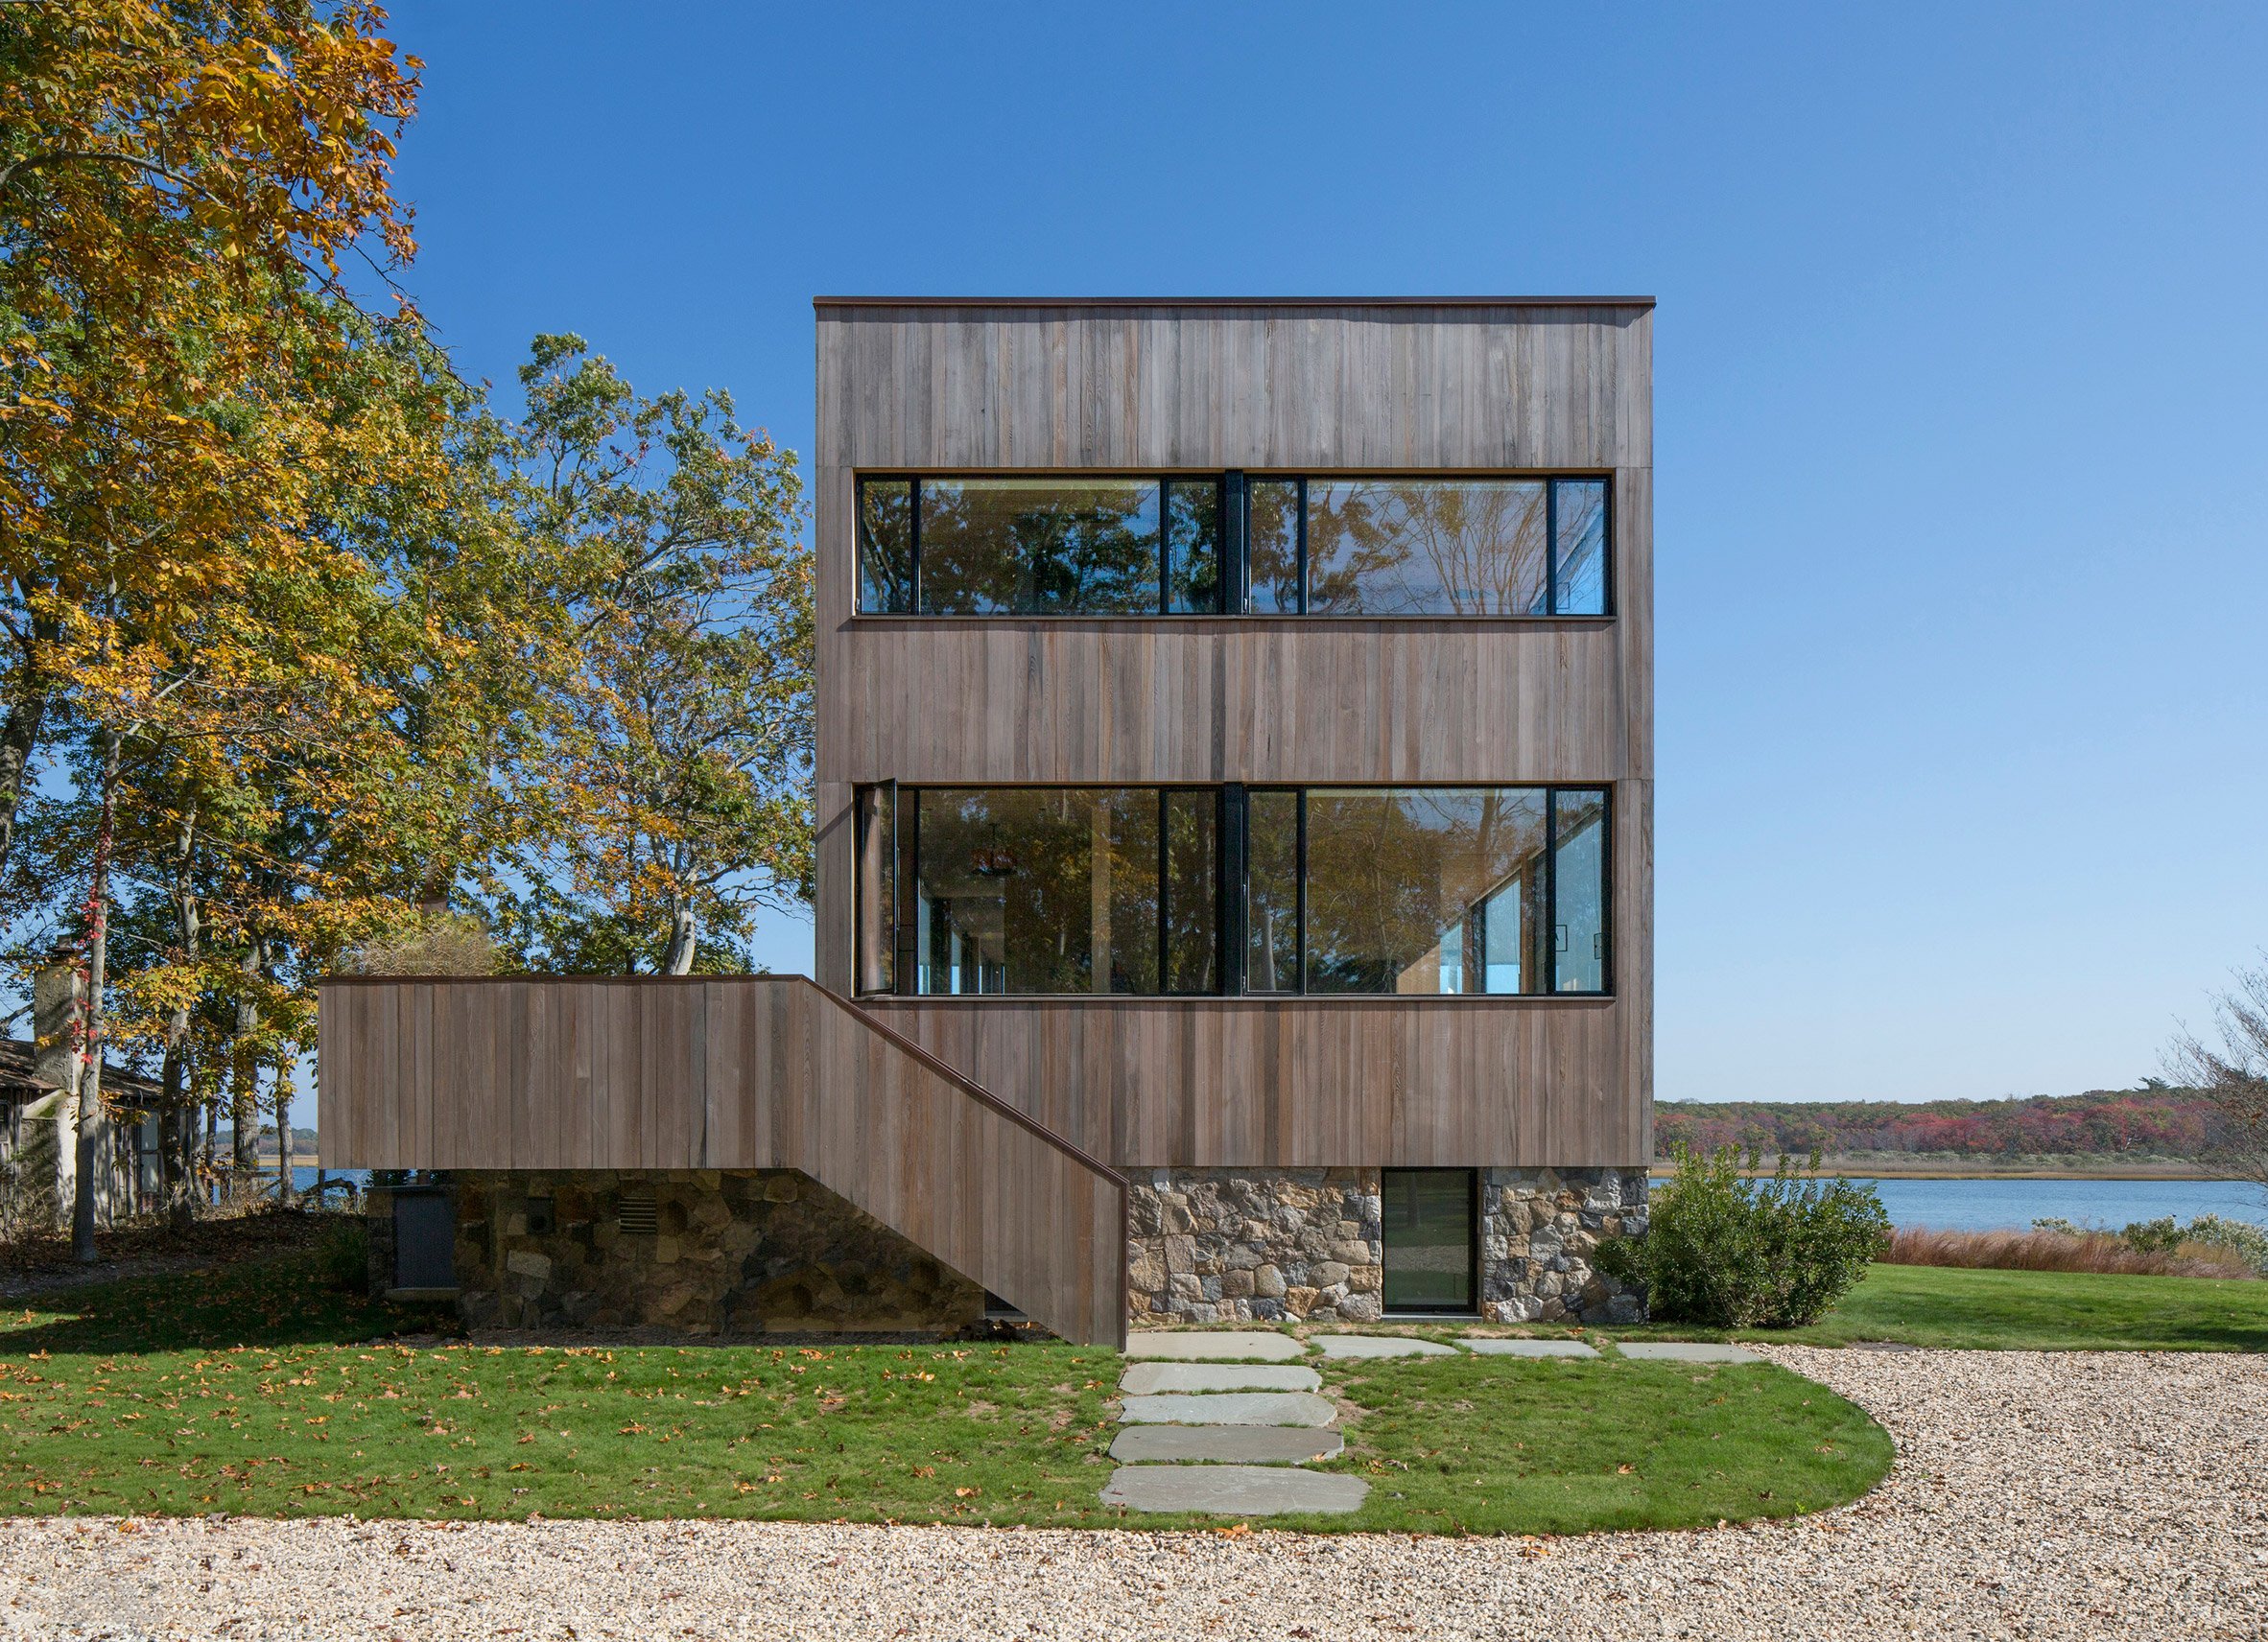 Cary Tamarkin constructs Island Creek home in the Hamptons with local materials